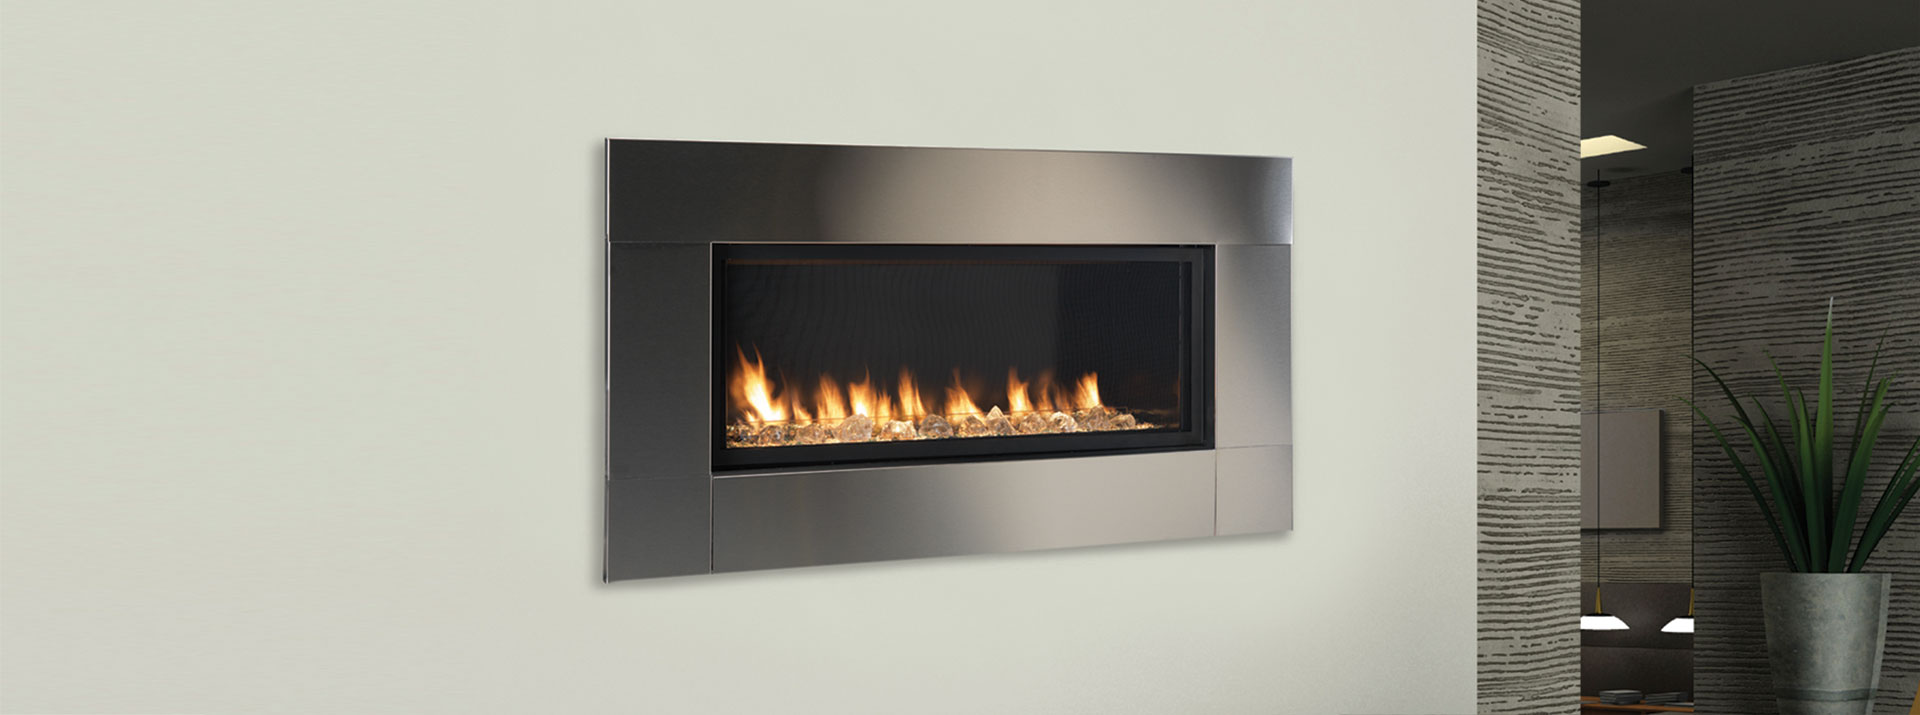 Linear Vent Free Gas Fireplace Lovely Vent Free Showroom